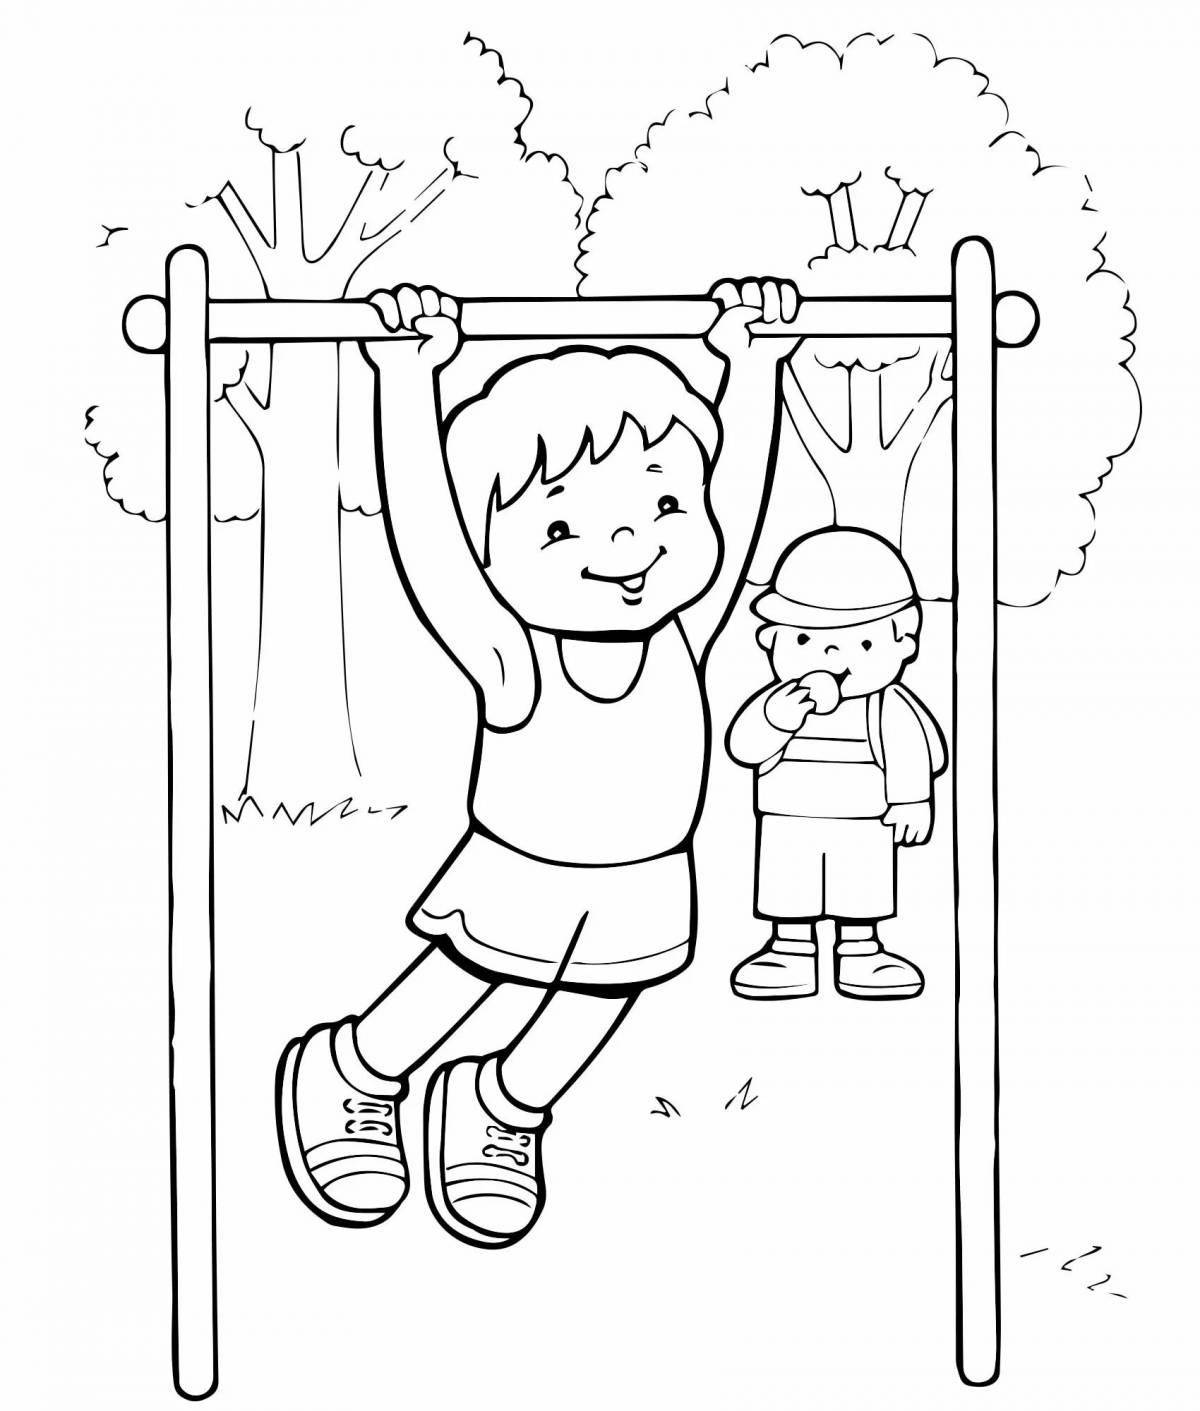 Joyful physical education and sports coloring book